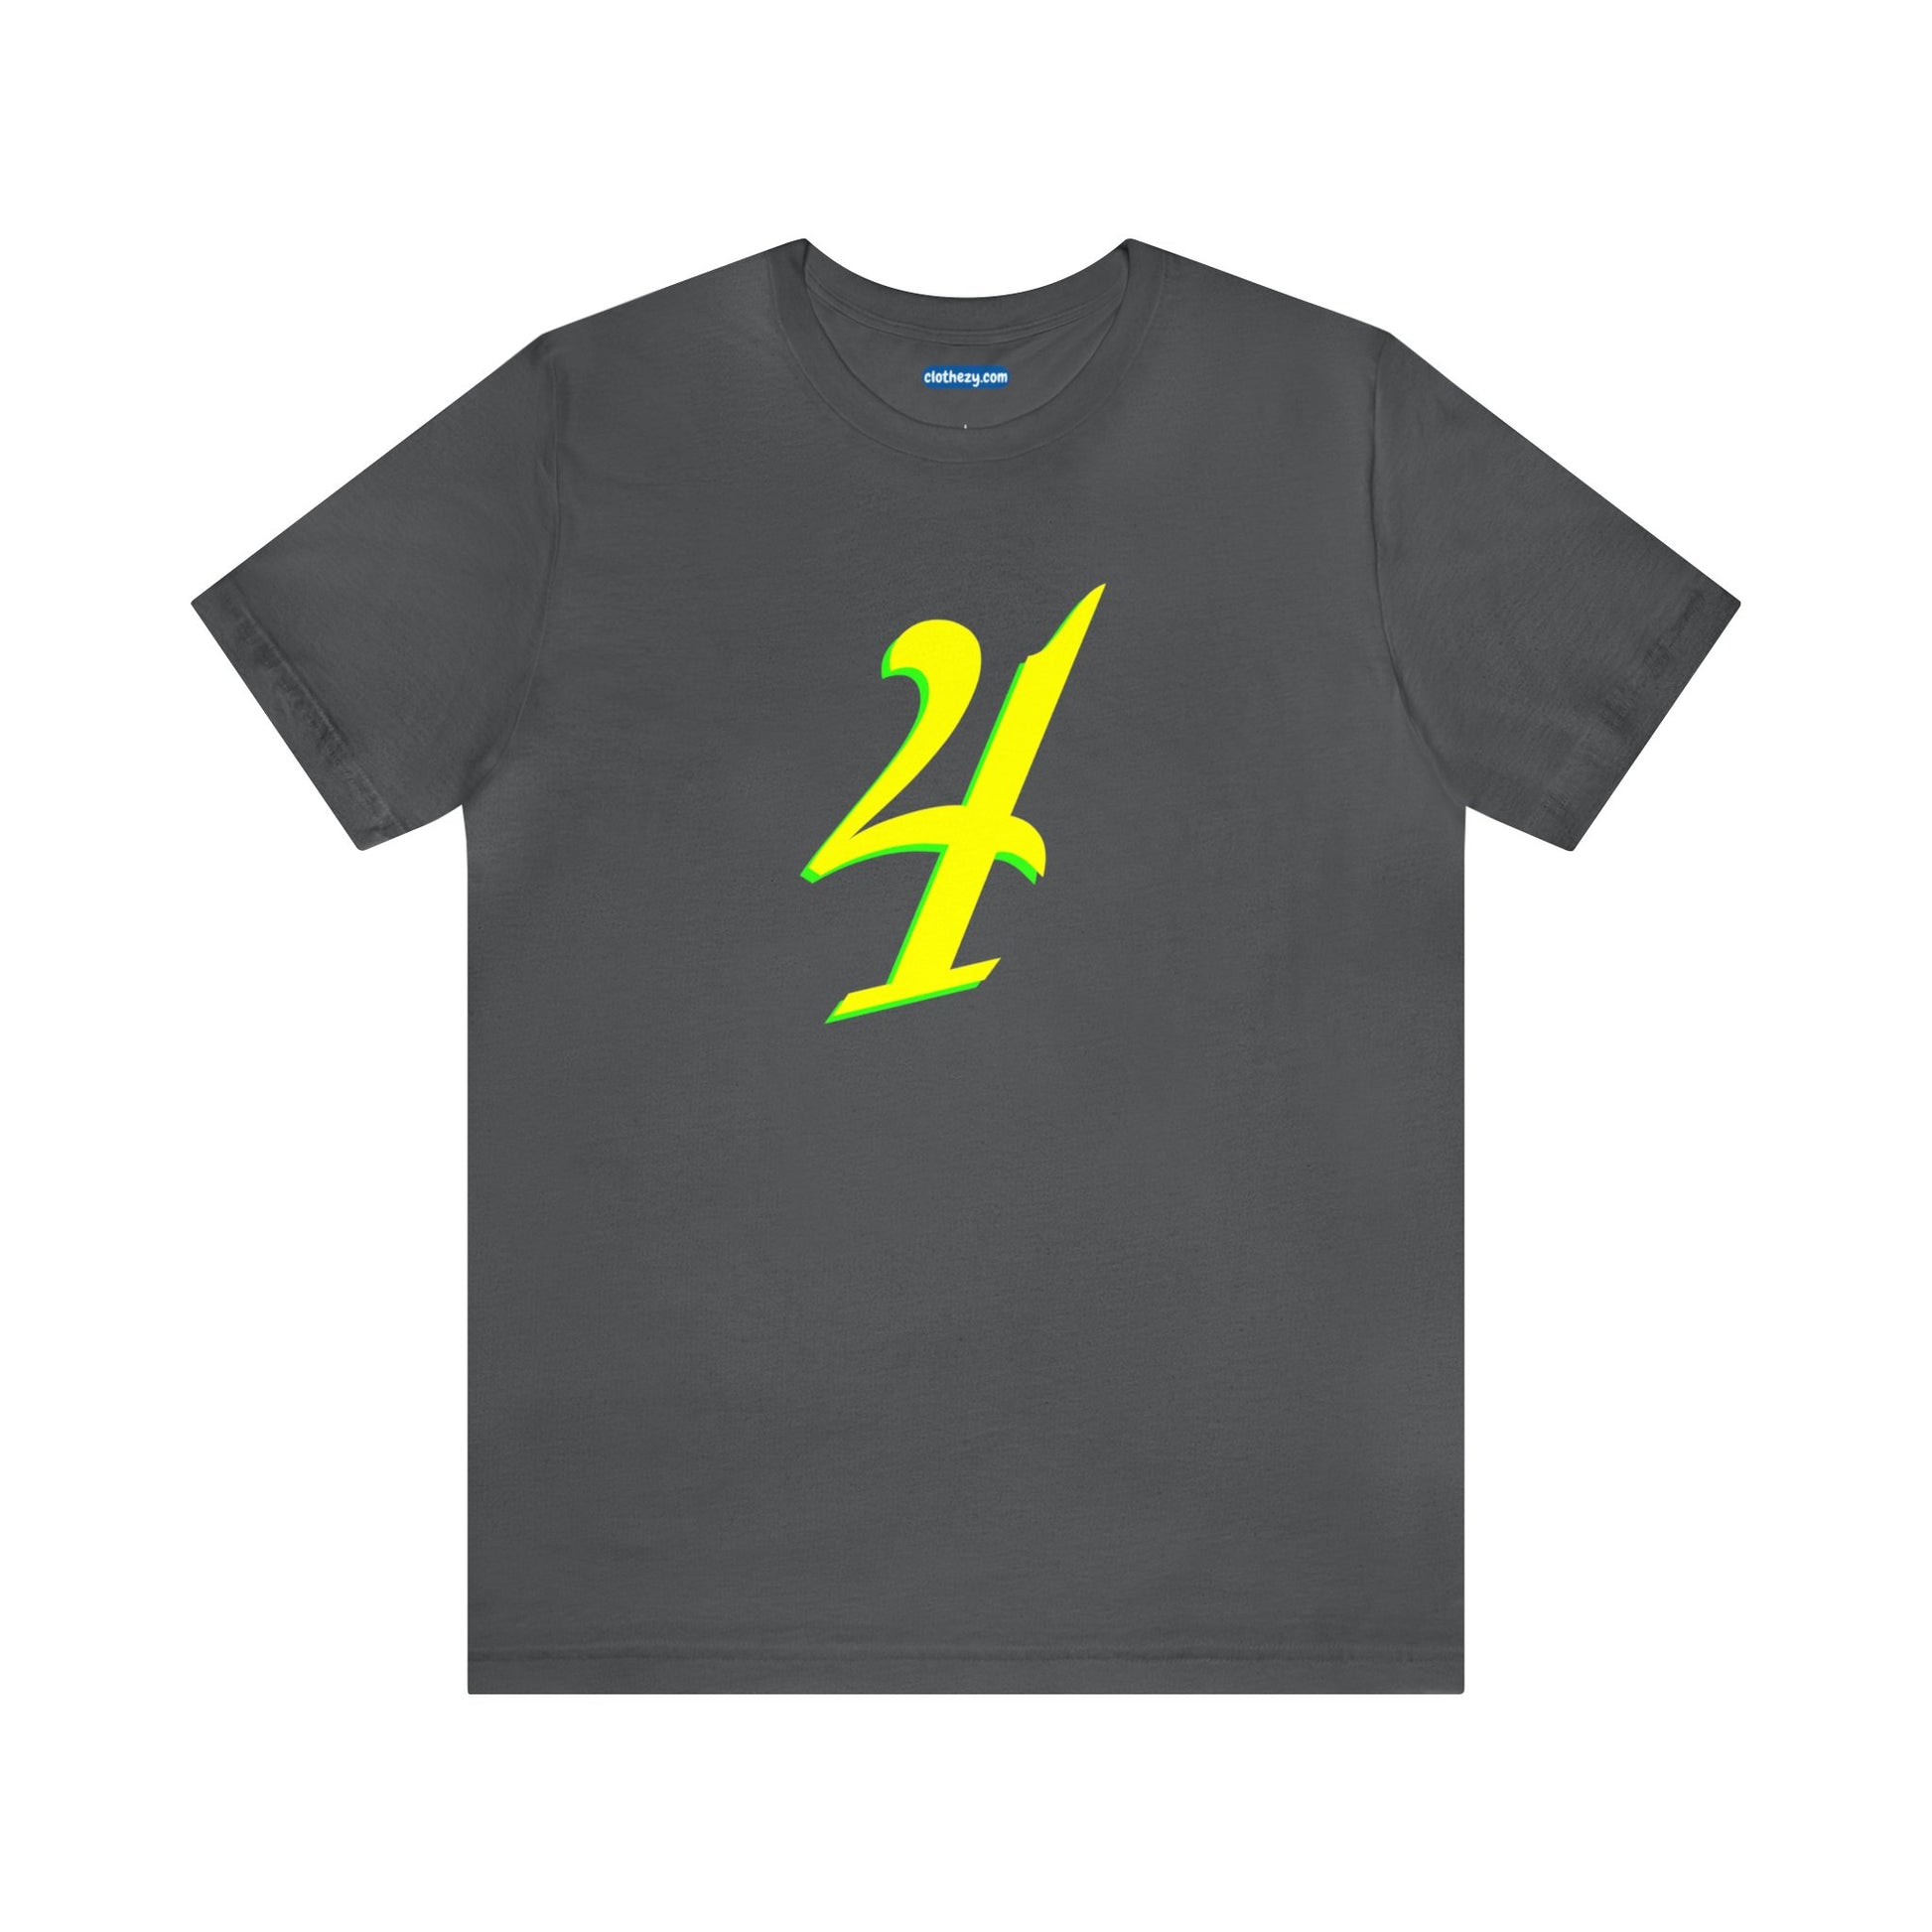 Number 4 Design - Soft Cotton Tee for birthdays and celebrations, Gift for friends and family, Multiple Options by clothezy.com in Black Size Small - Buy Now